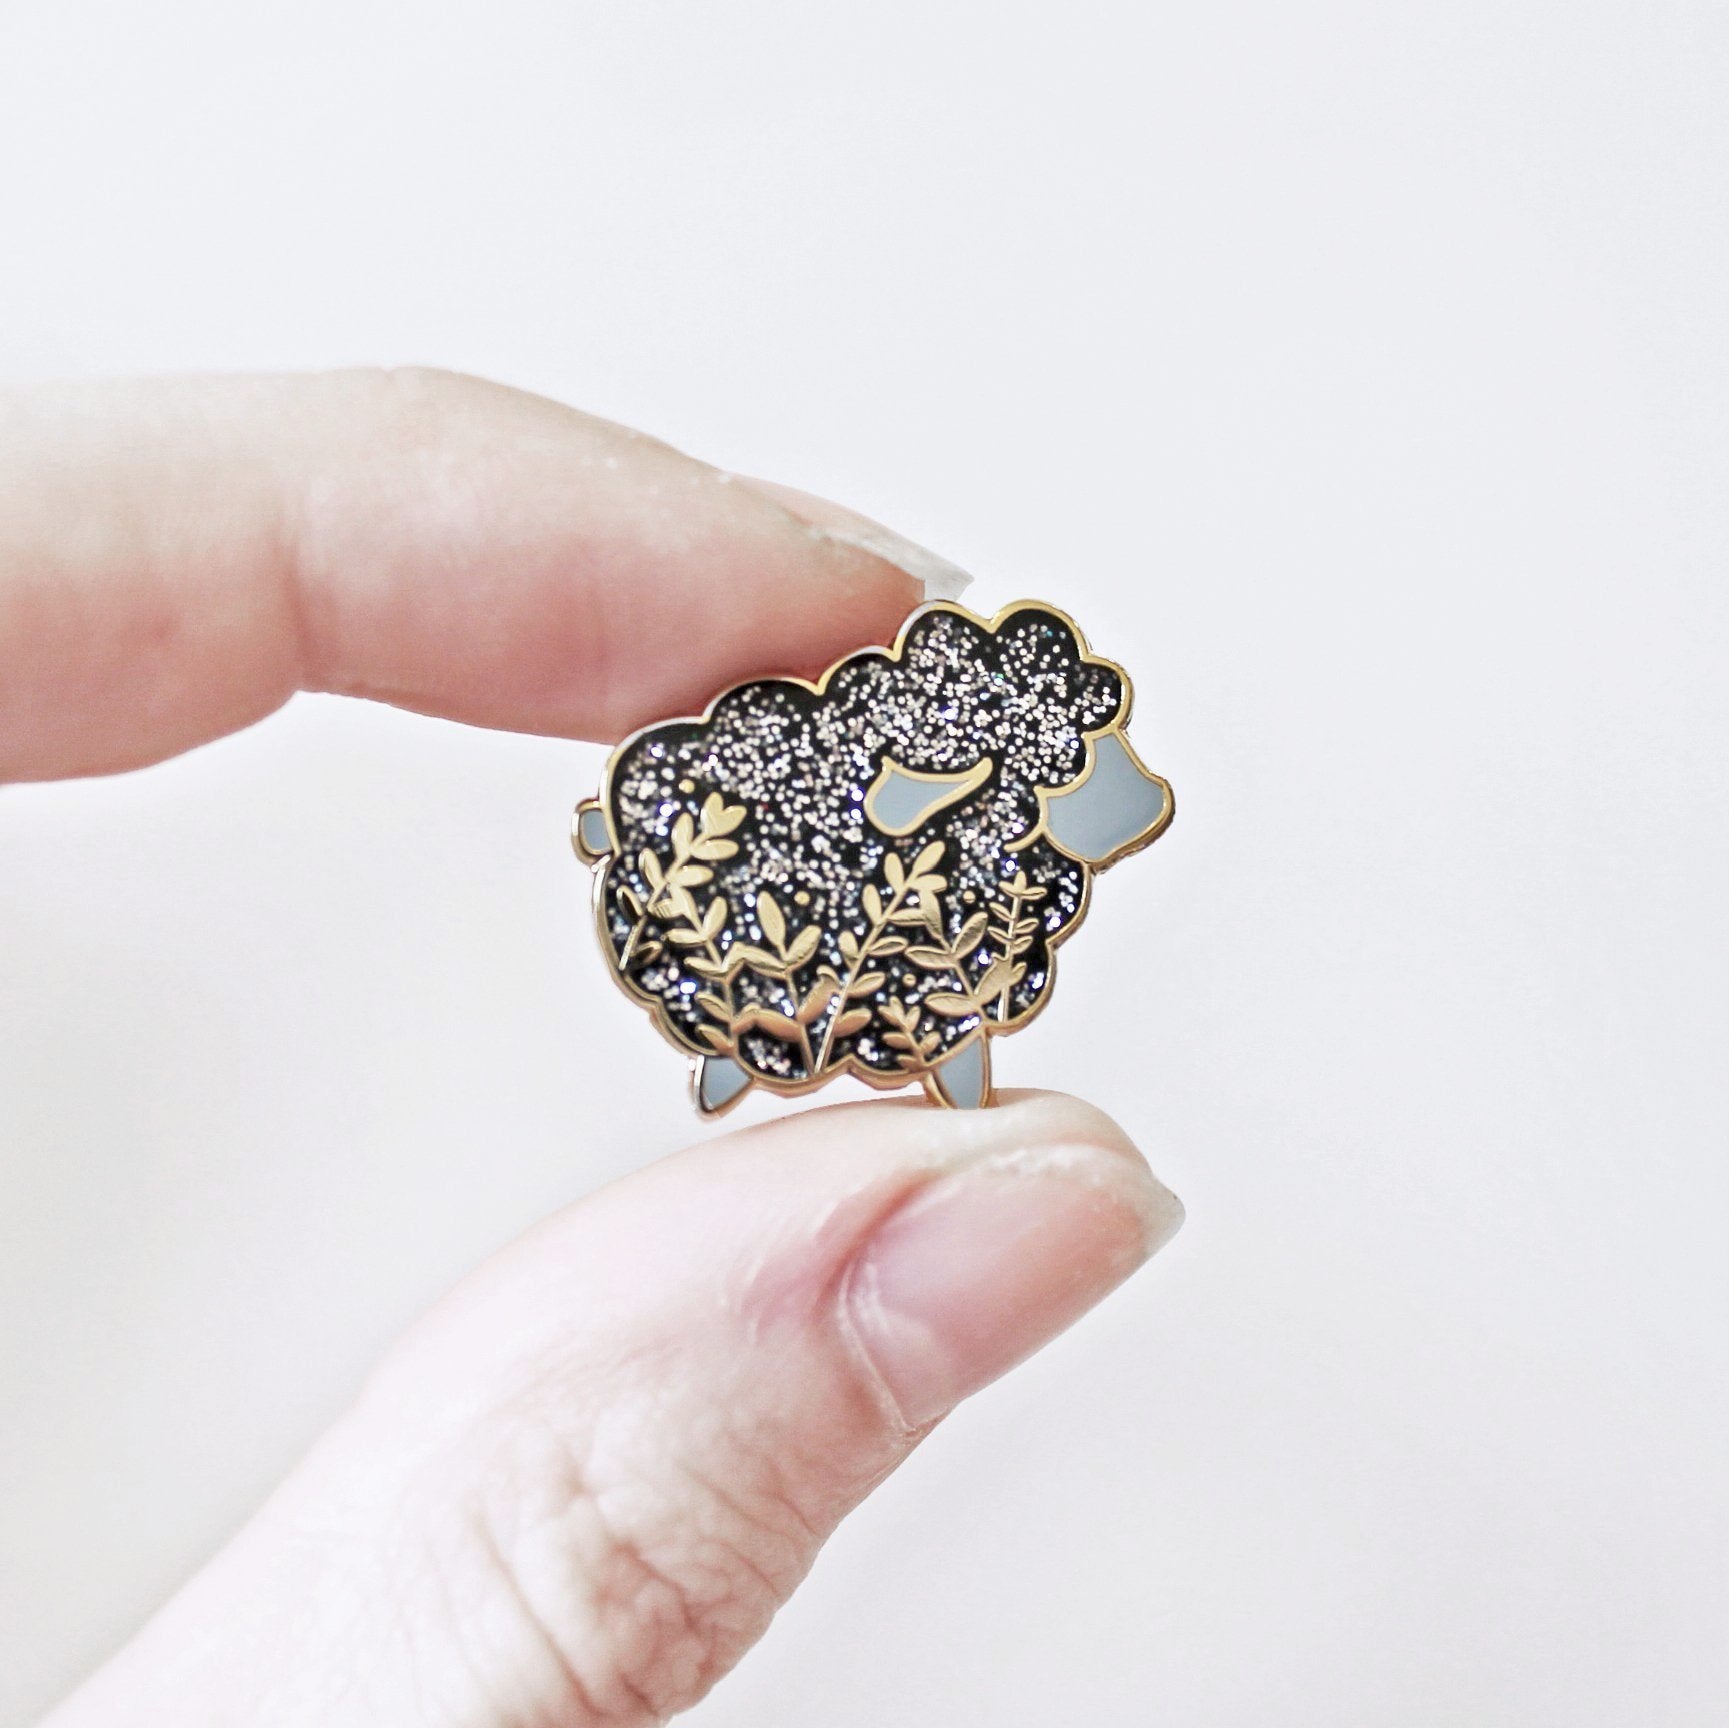 Cute sheep enamel pin with a little floral whimsy and glitter. A beautiful pin made for animal lovers, fiber enthusiasts, knitters and crocheters.